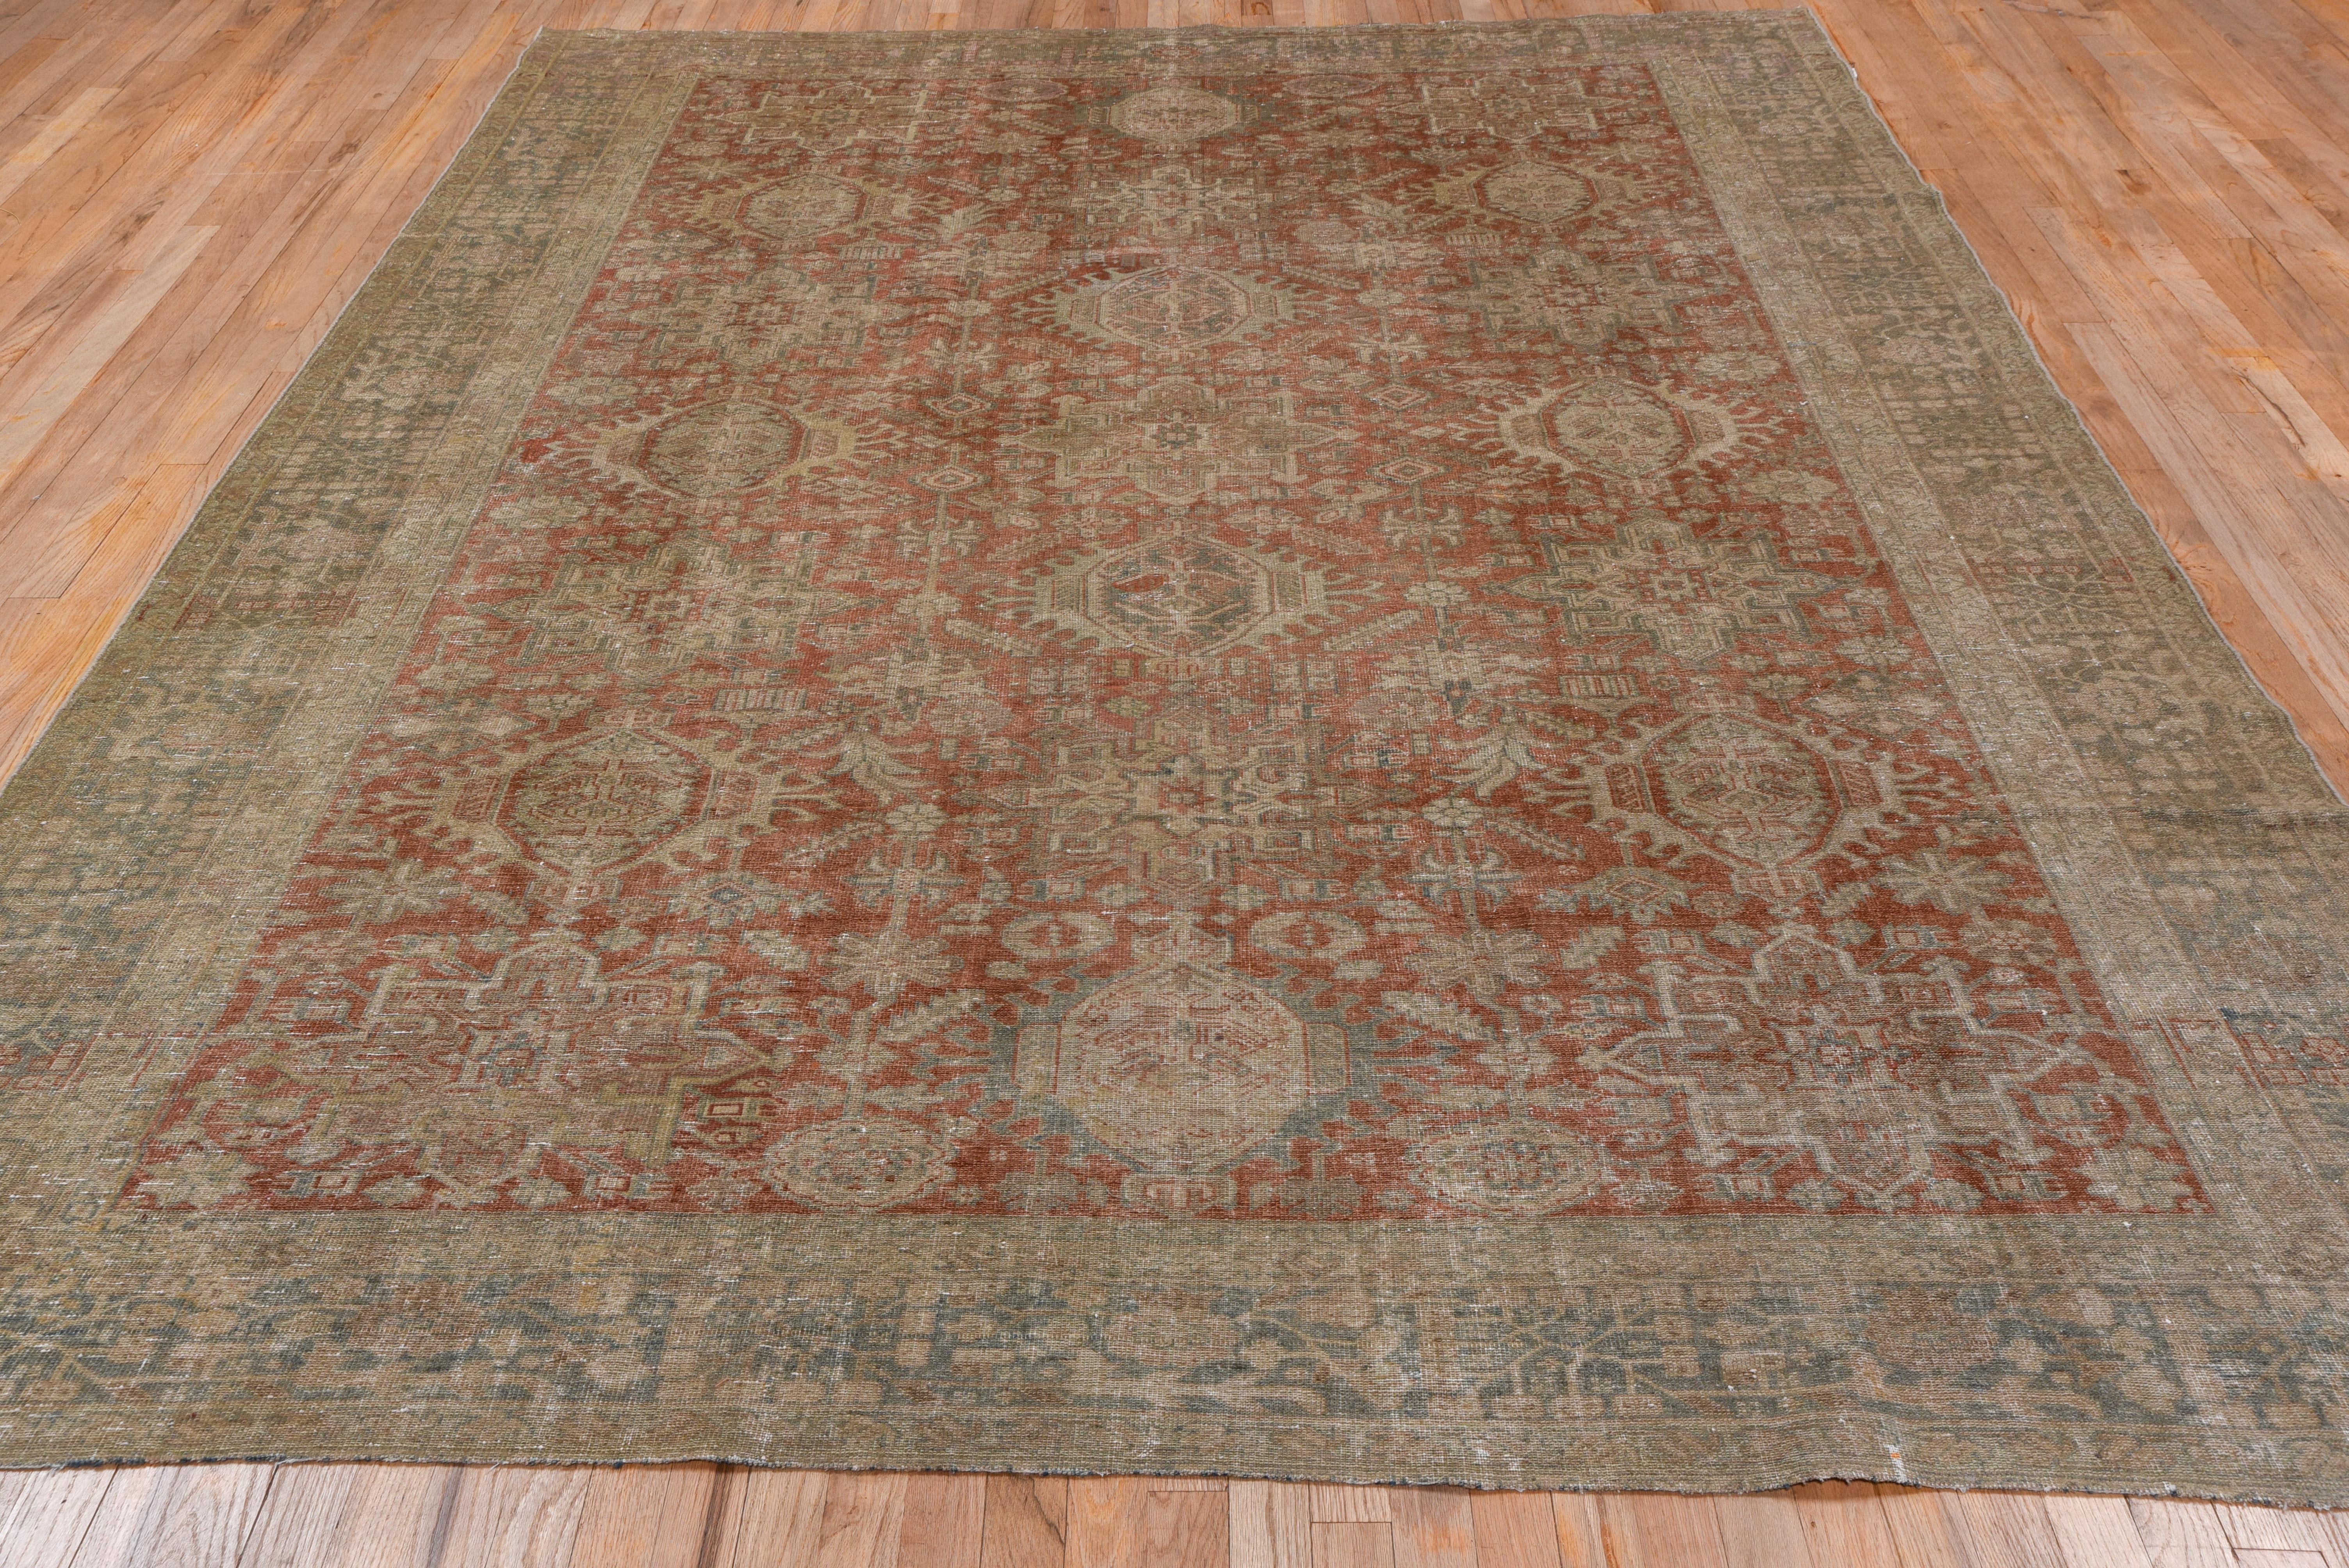 1920s Rustic Antique Persian Karaje Rug, Allover Rust Field, Teal Borders In Good Condition For Sale In New York, NY